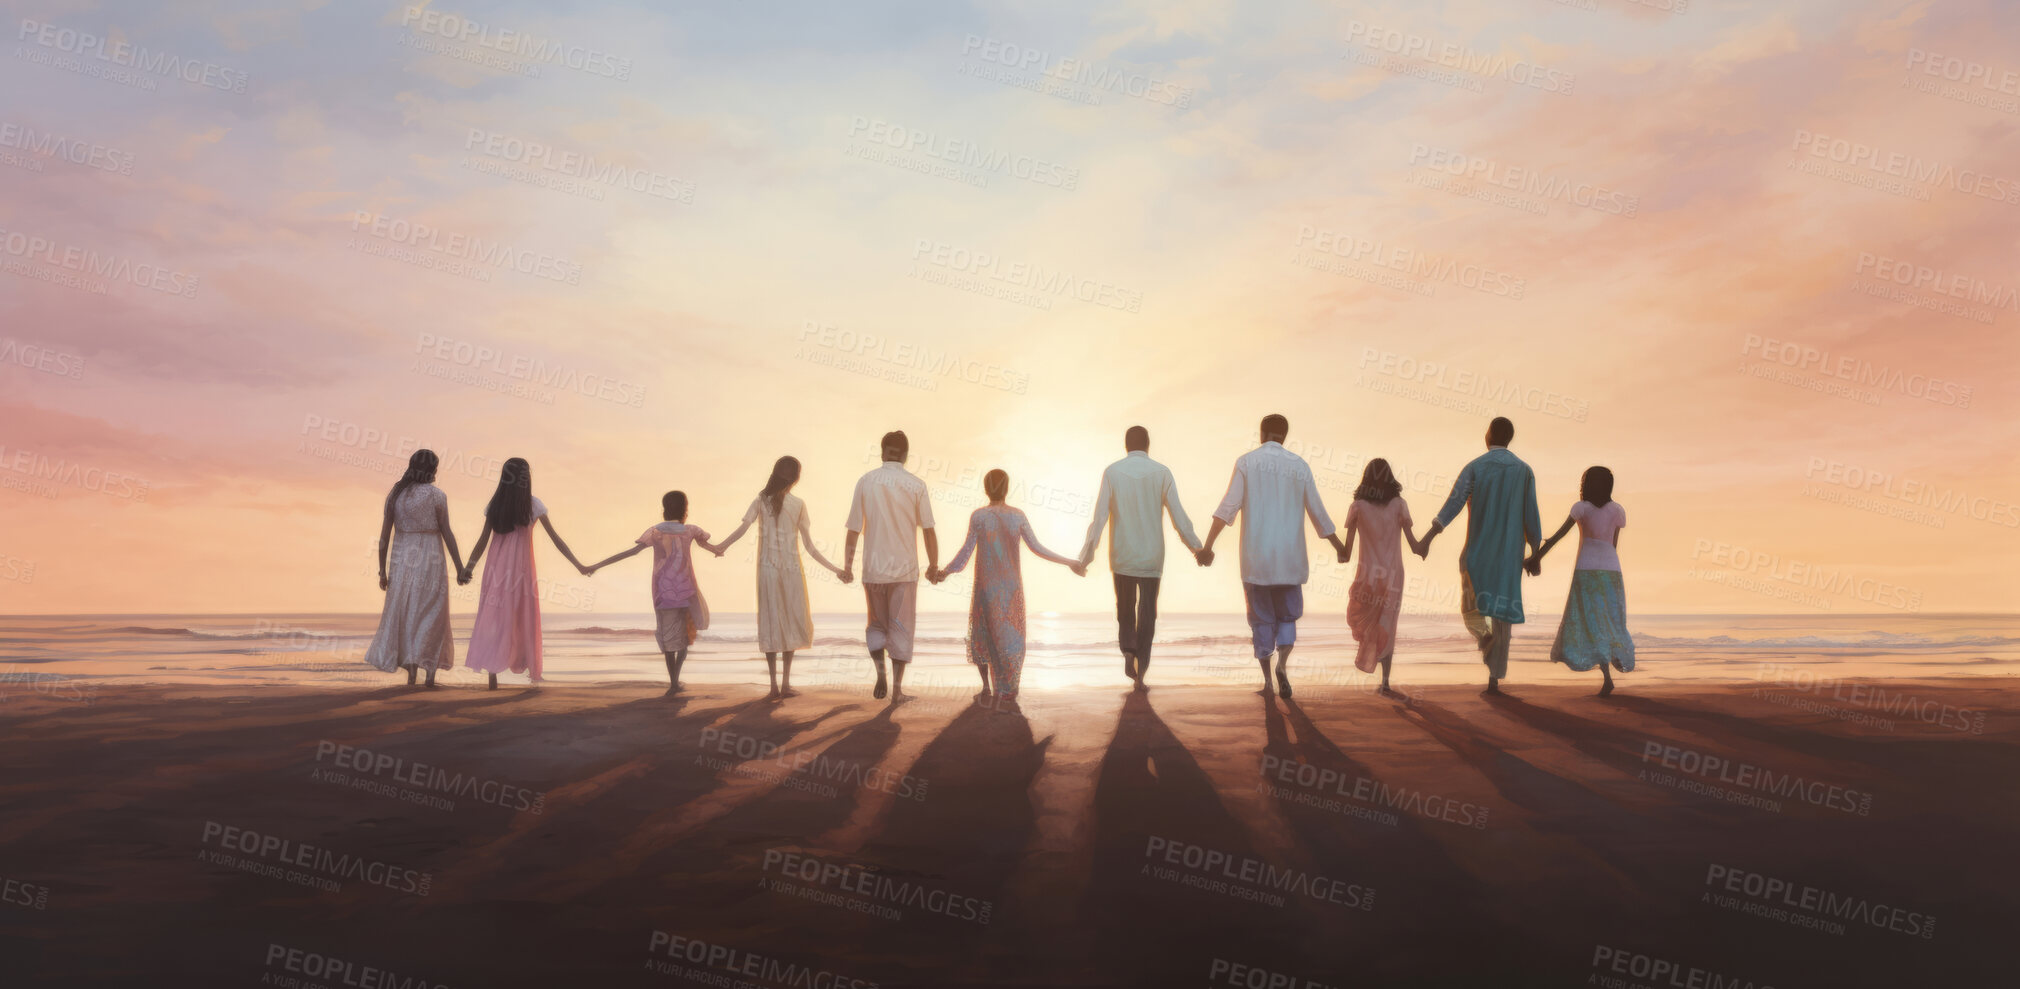 Buy stock photo Illustration of group of people holding hands facing sunset. Peace concept.